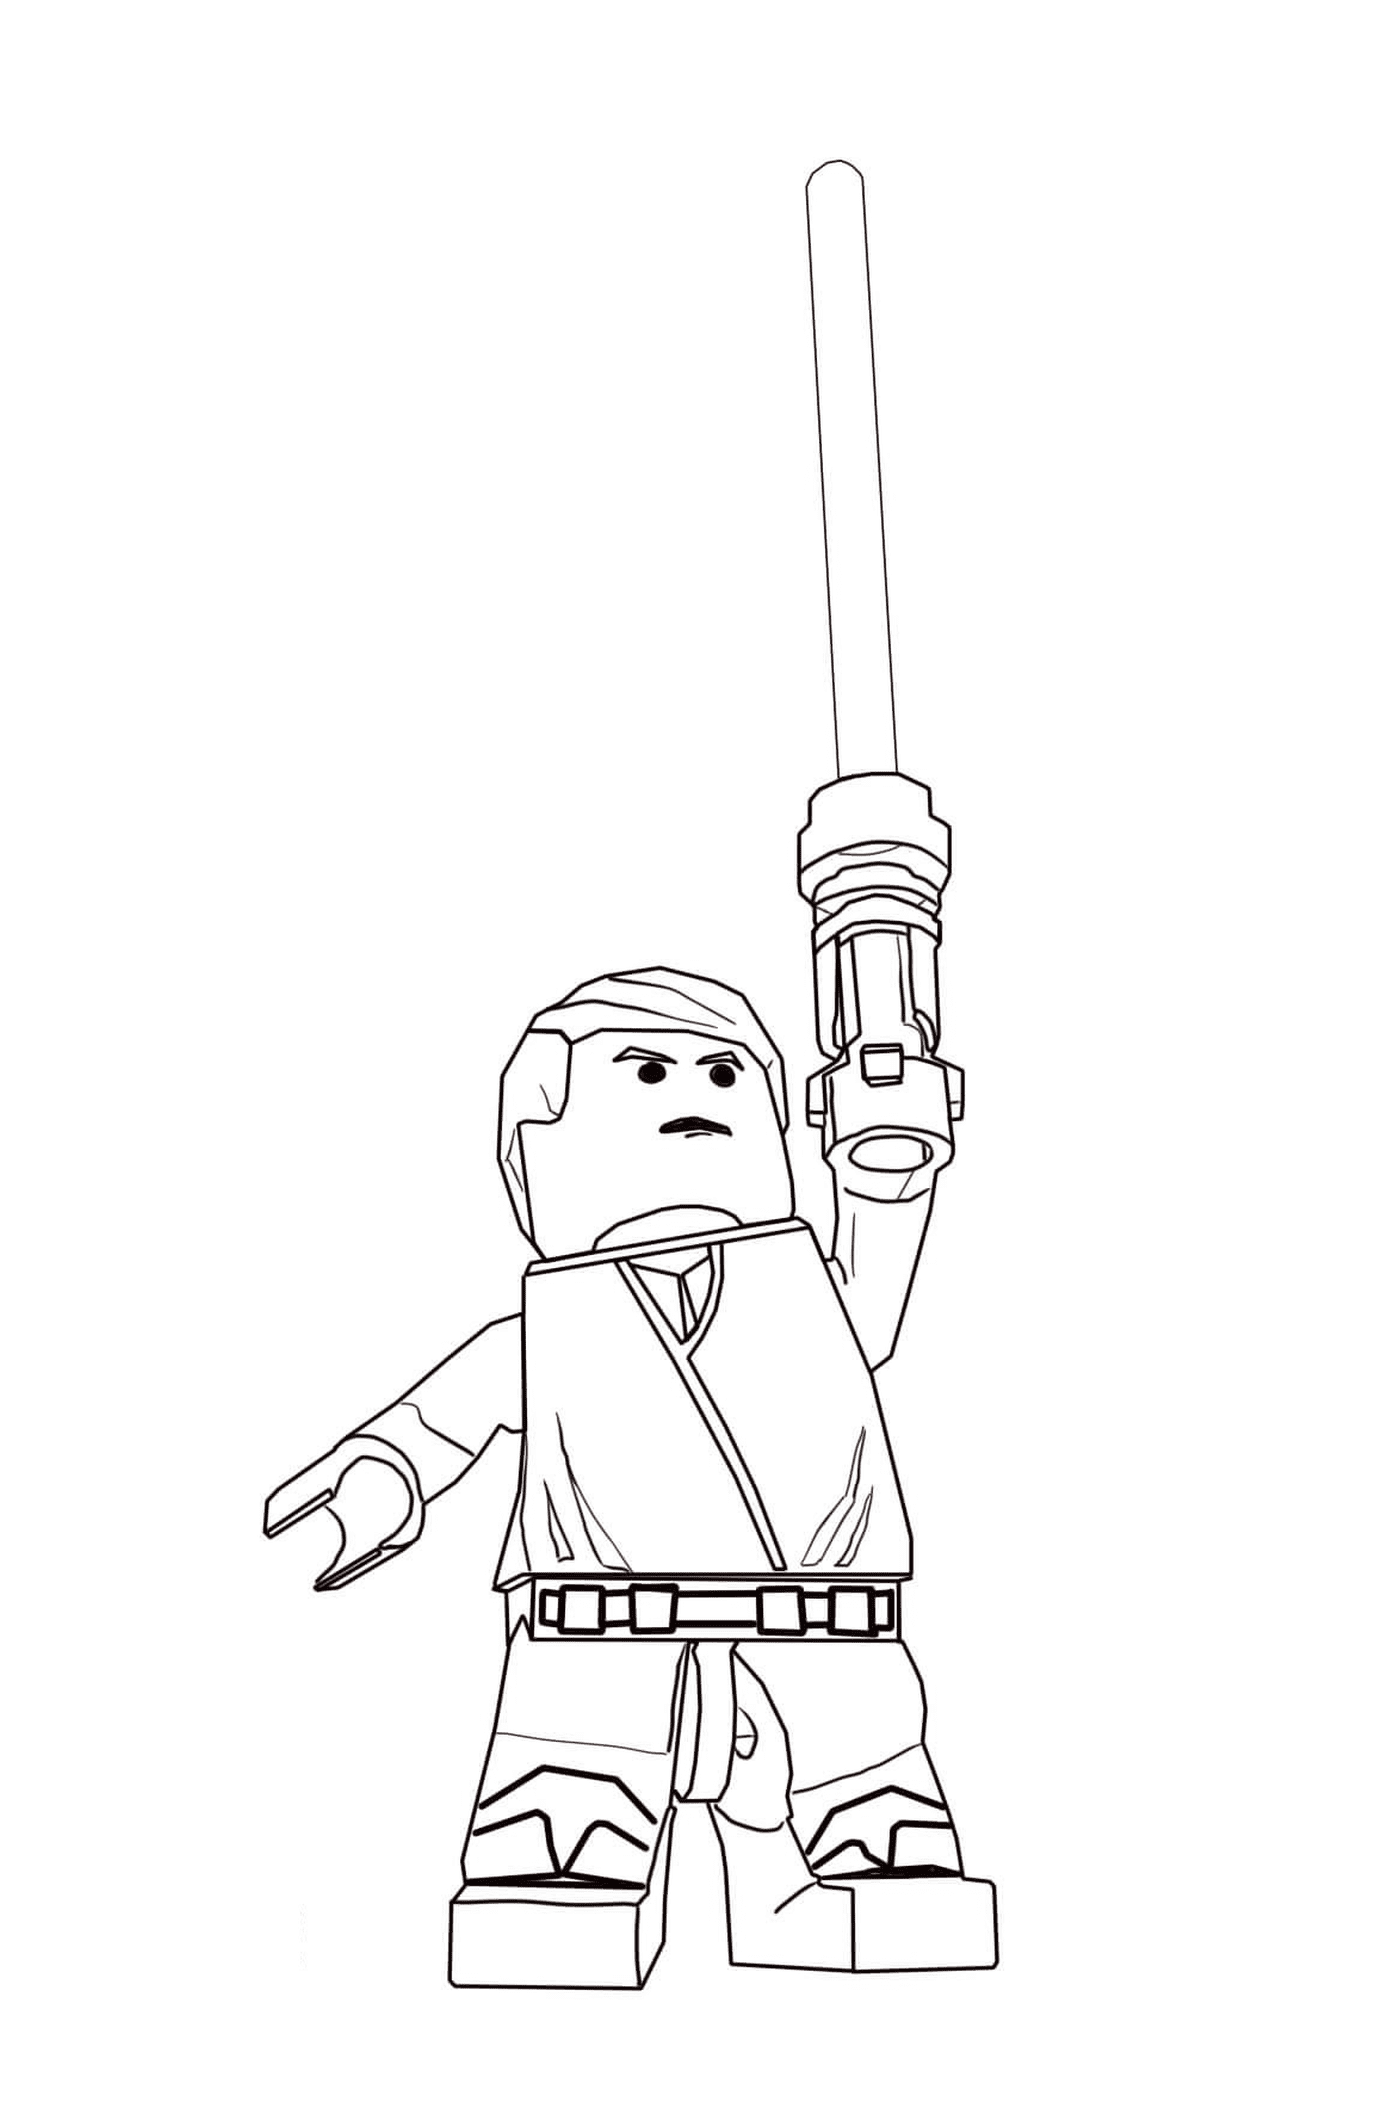  Lego Star Wars character with a laser sword 